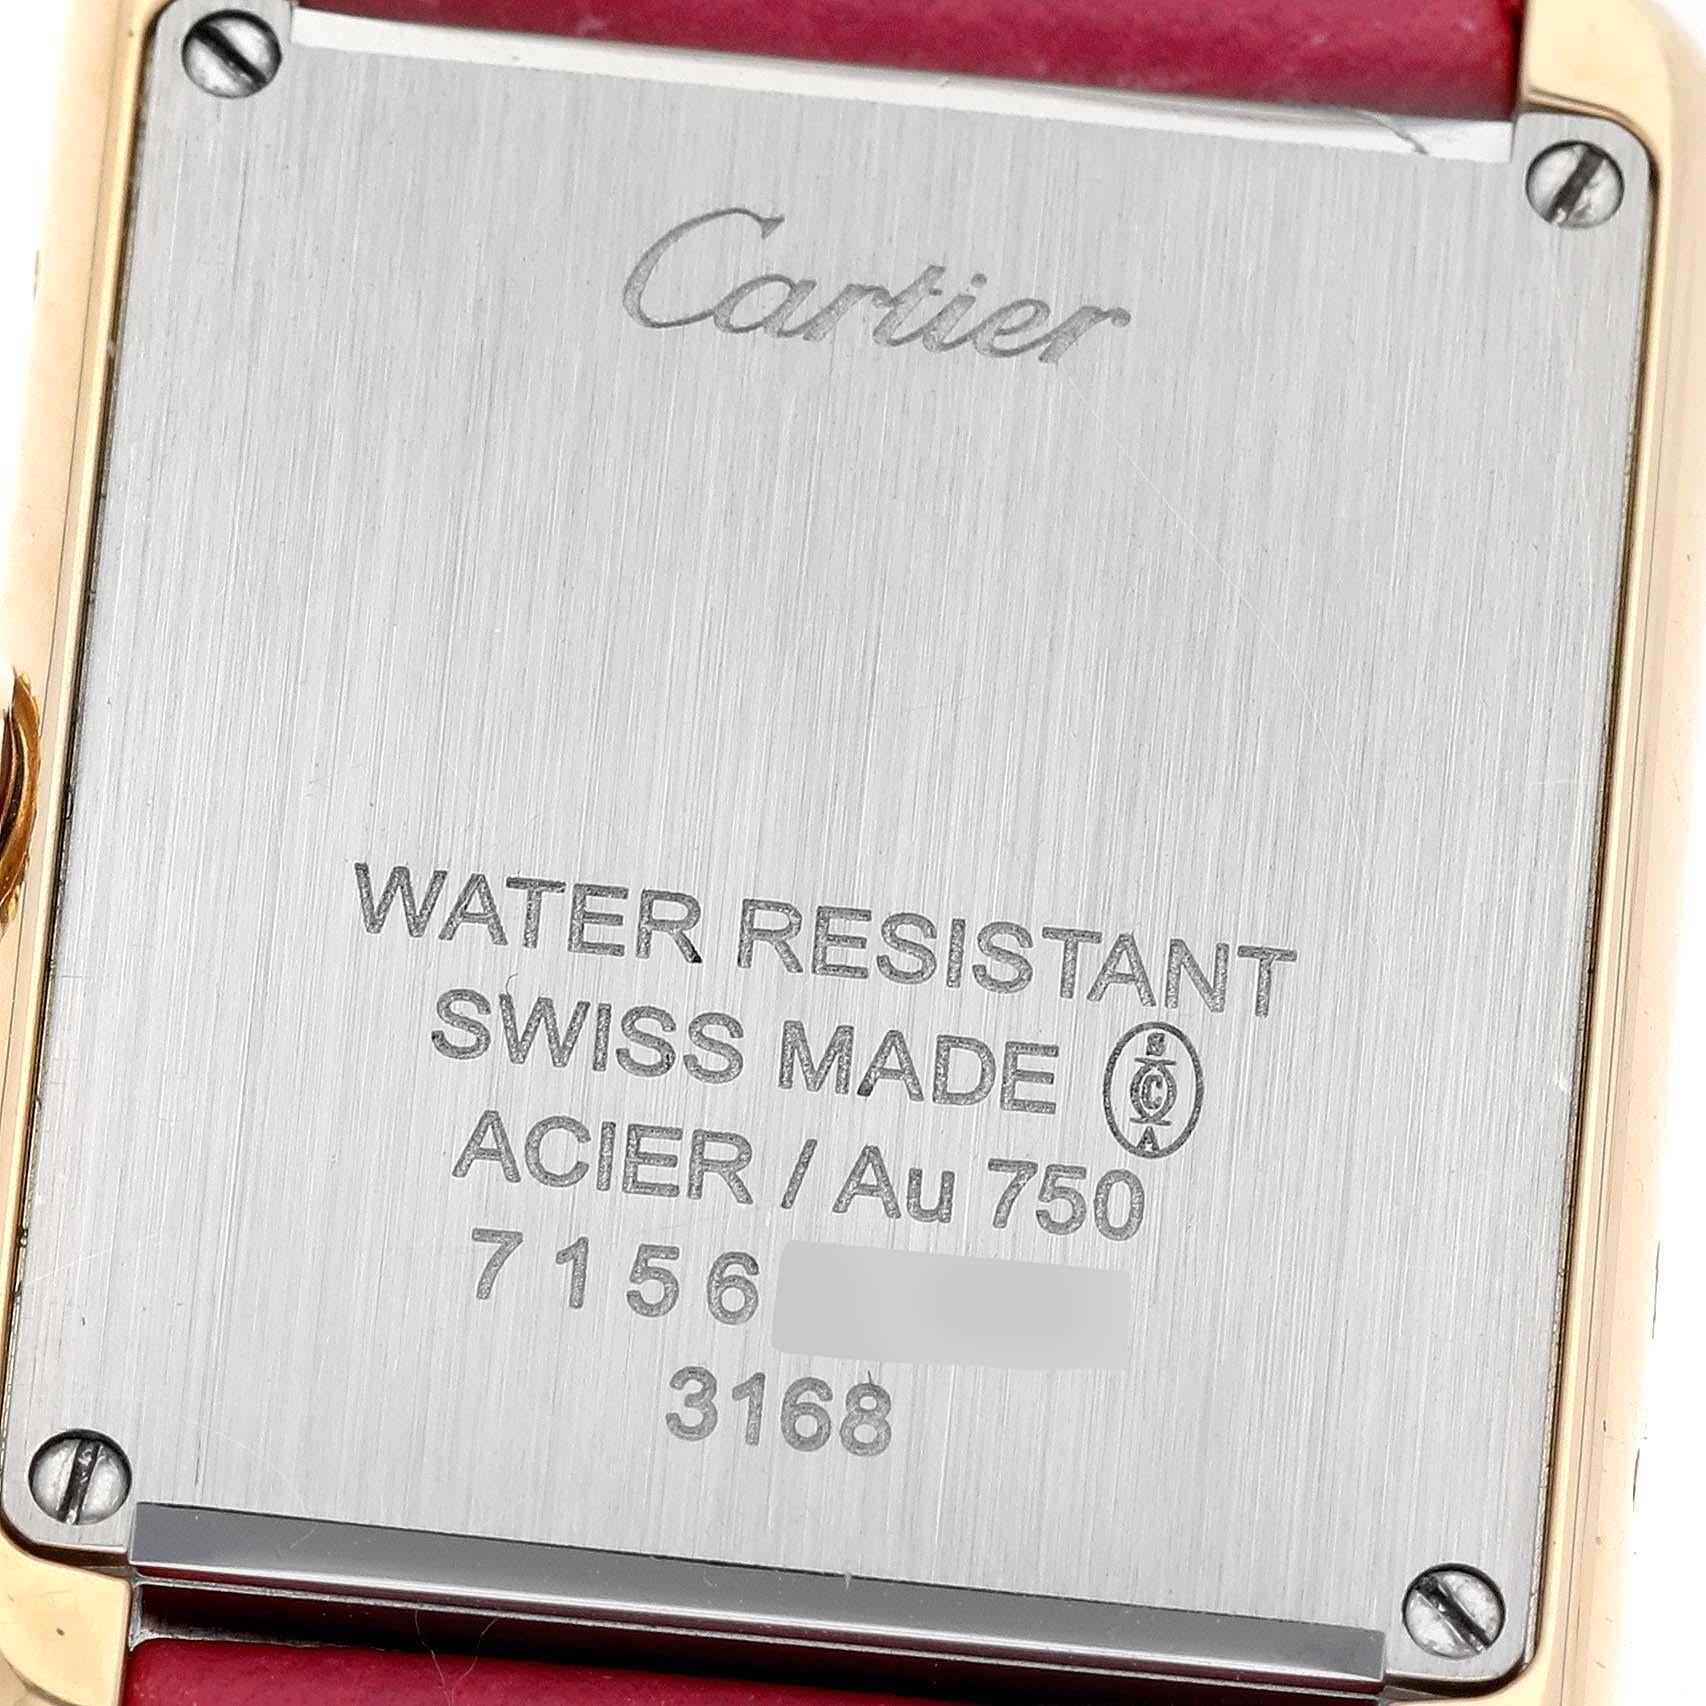 Cartier Tank Solo Yellow Gold Steel Silver Dial Ladies Watch W5200002 Papers. Quartz movement. 18k yellow gold case 30.0 x 24.4 mm. Stainless steel caseback. Circular grained crown set with blue spinel cabochon. . Scratch resistant sapphire crystal.